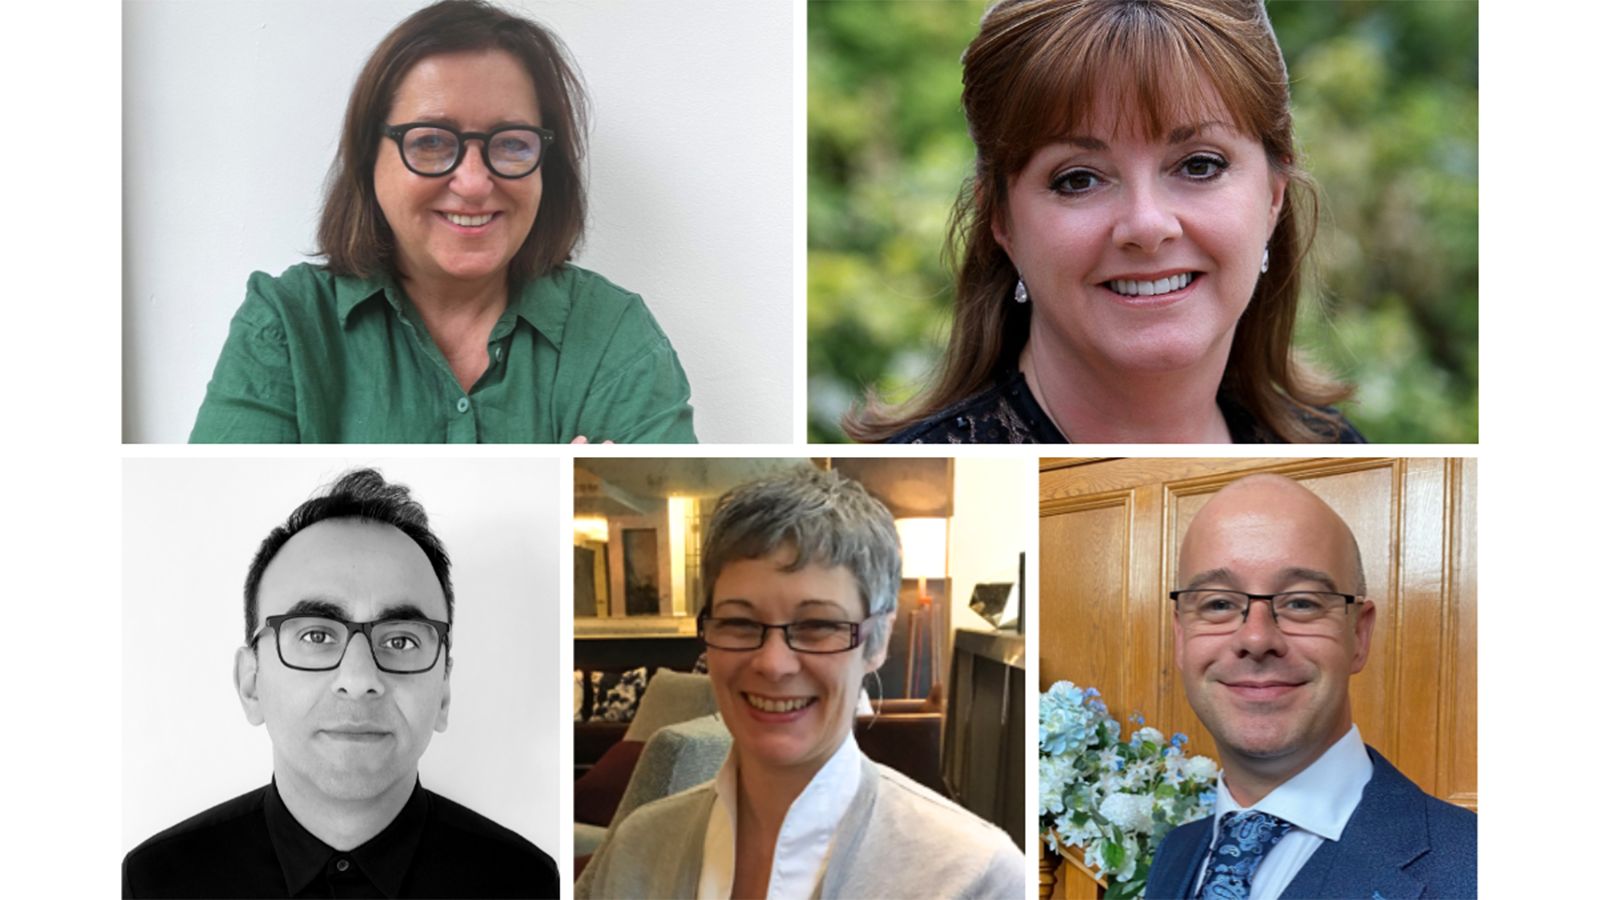 Creative Scotland's new Board Members. Top row, left to right: Heather Stewart, Louise Wilson. Bottom row, left to right: Muslim Alim, Norah Campbell and Patrick Brown